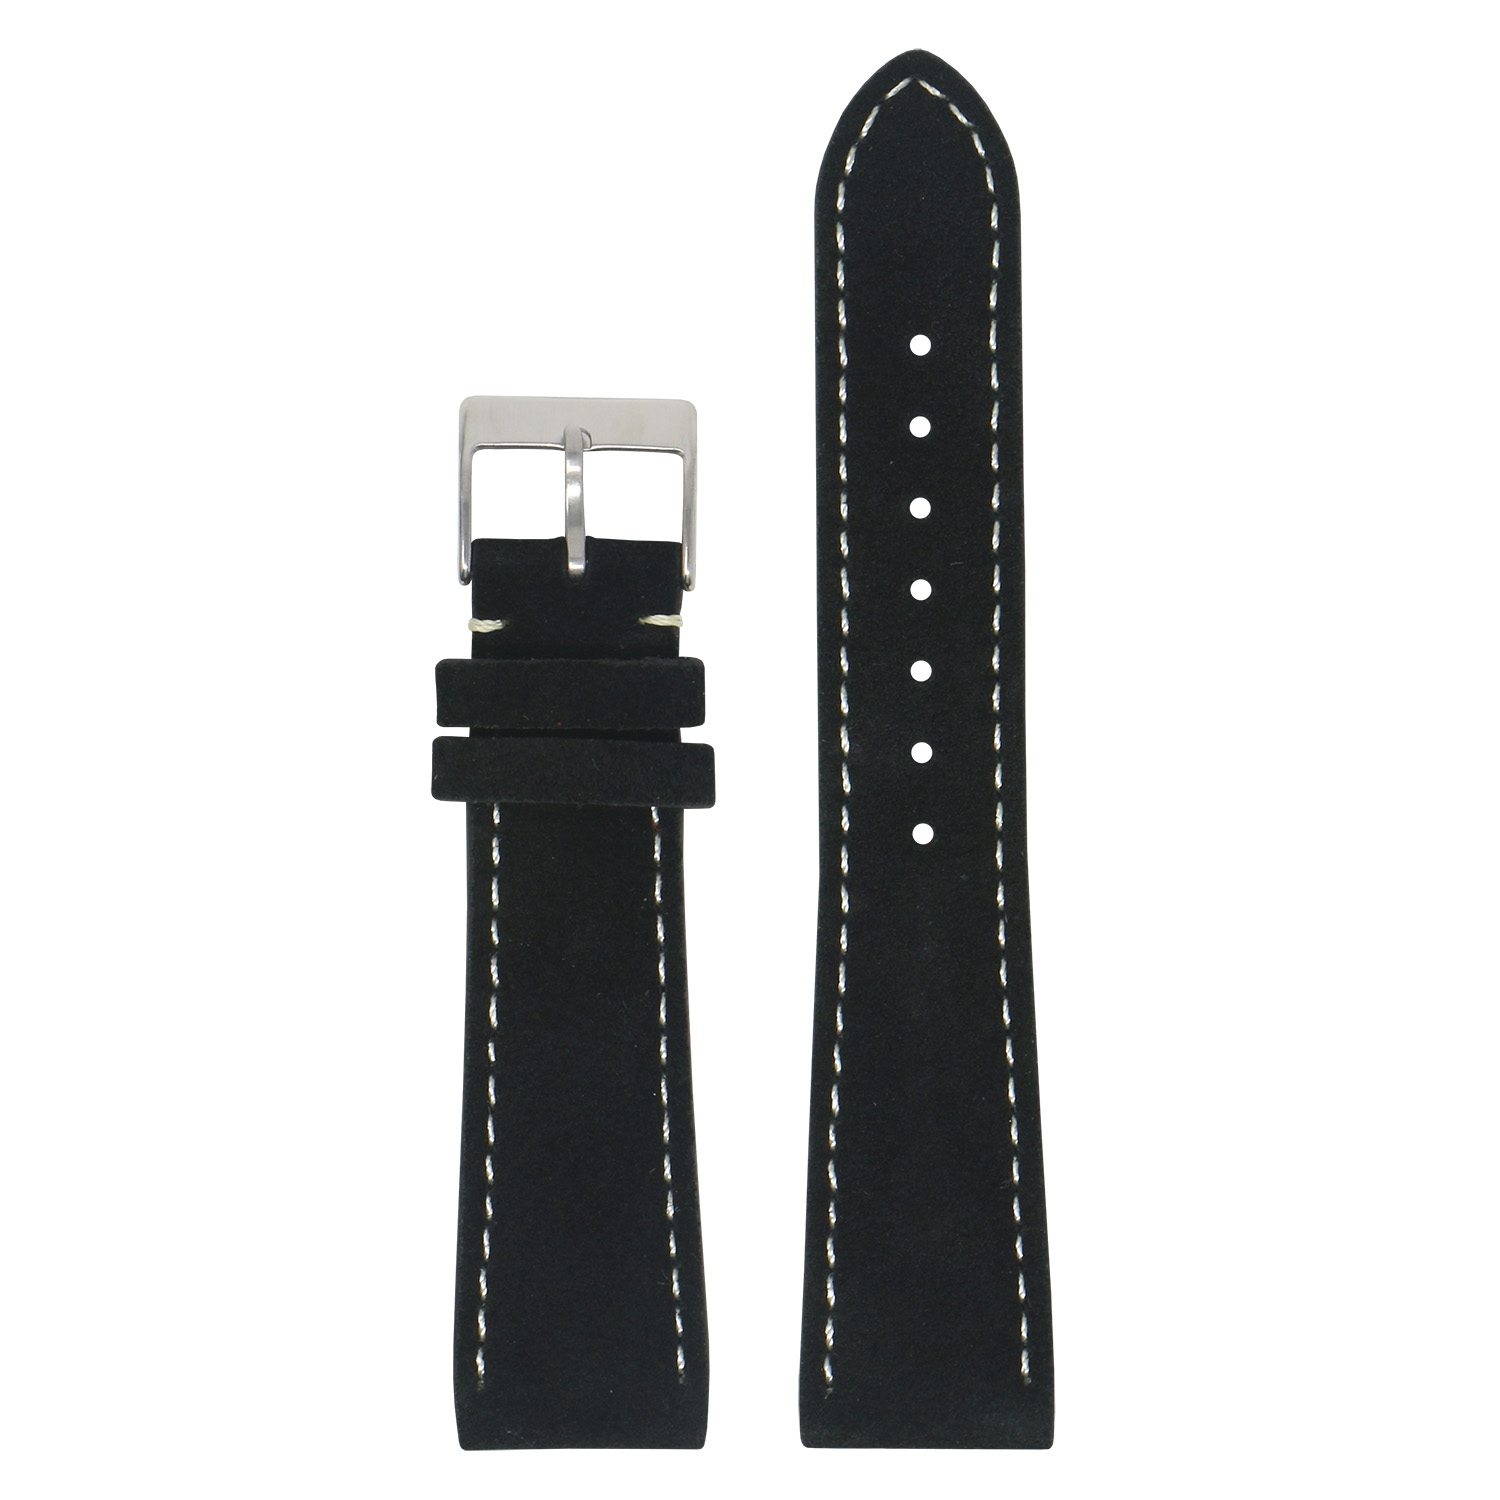 StrapsCo Classic Suede (Short, Standard, Long) Watch Band Strap for Samsung Galaxy Watch 3 - Standard Length - 20mm - For 41mm Galaxy Watch3 - Black